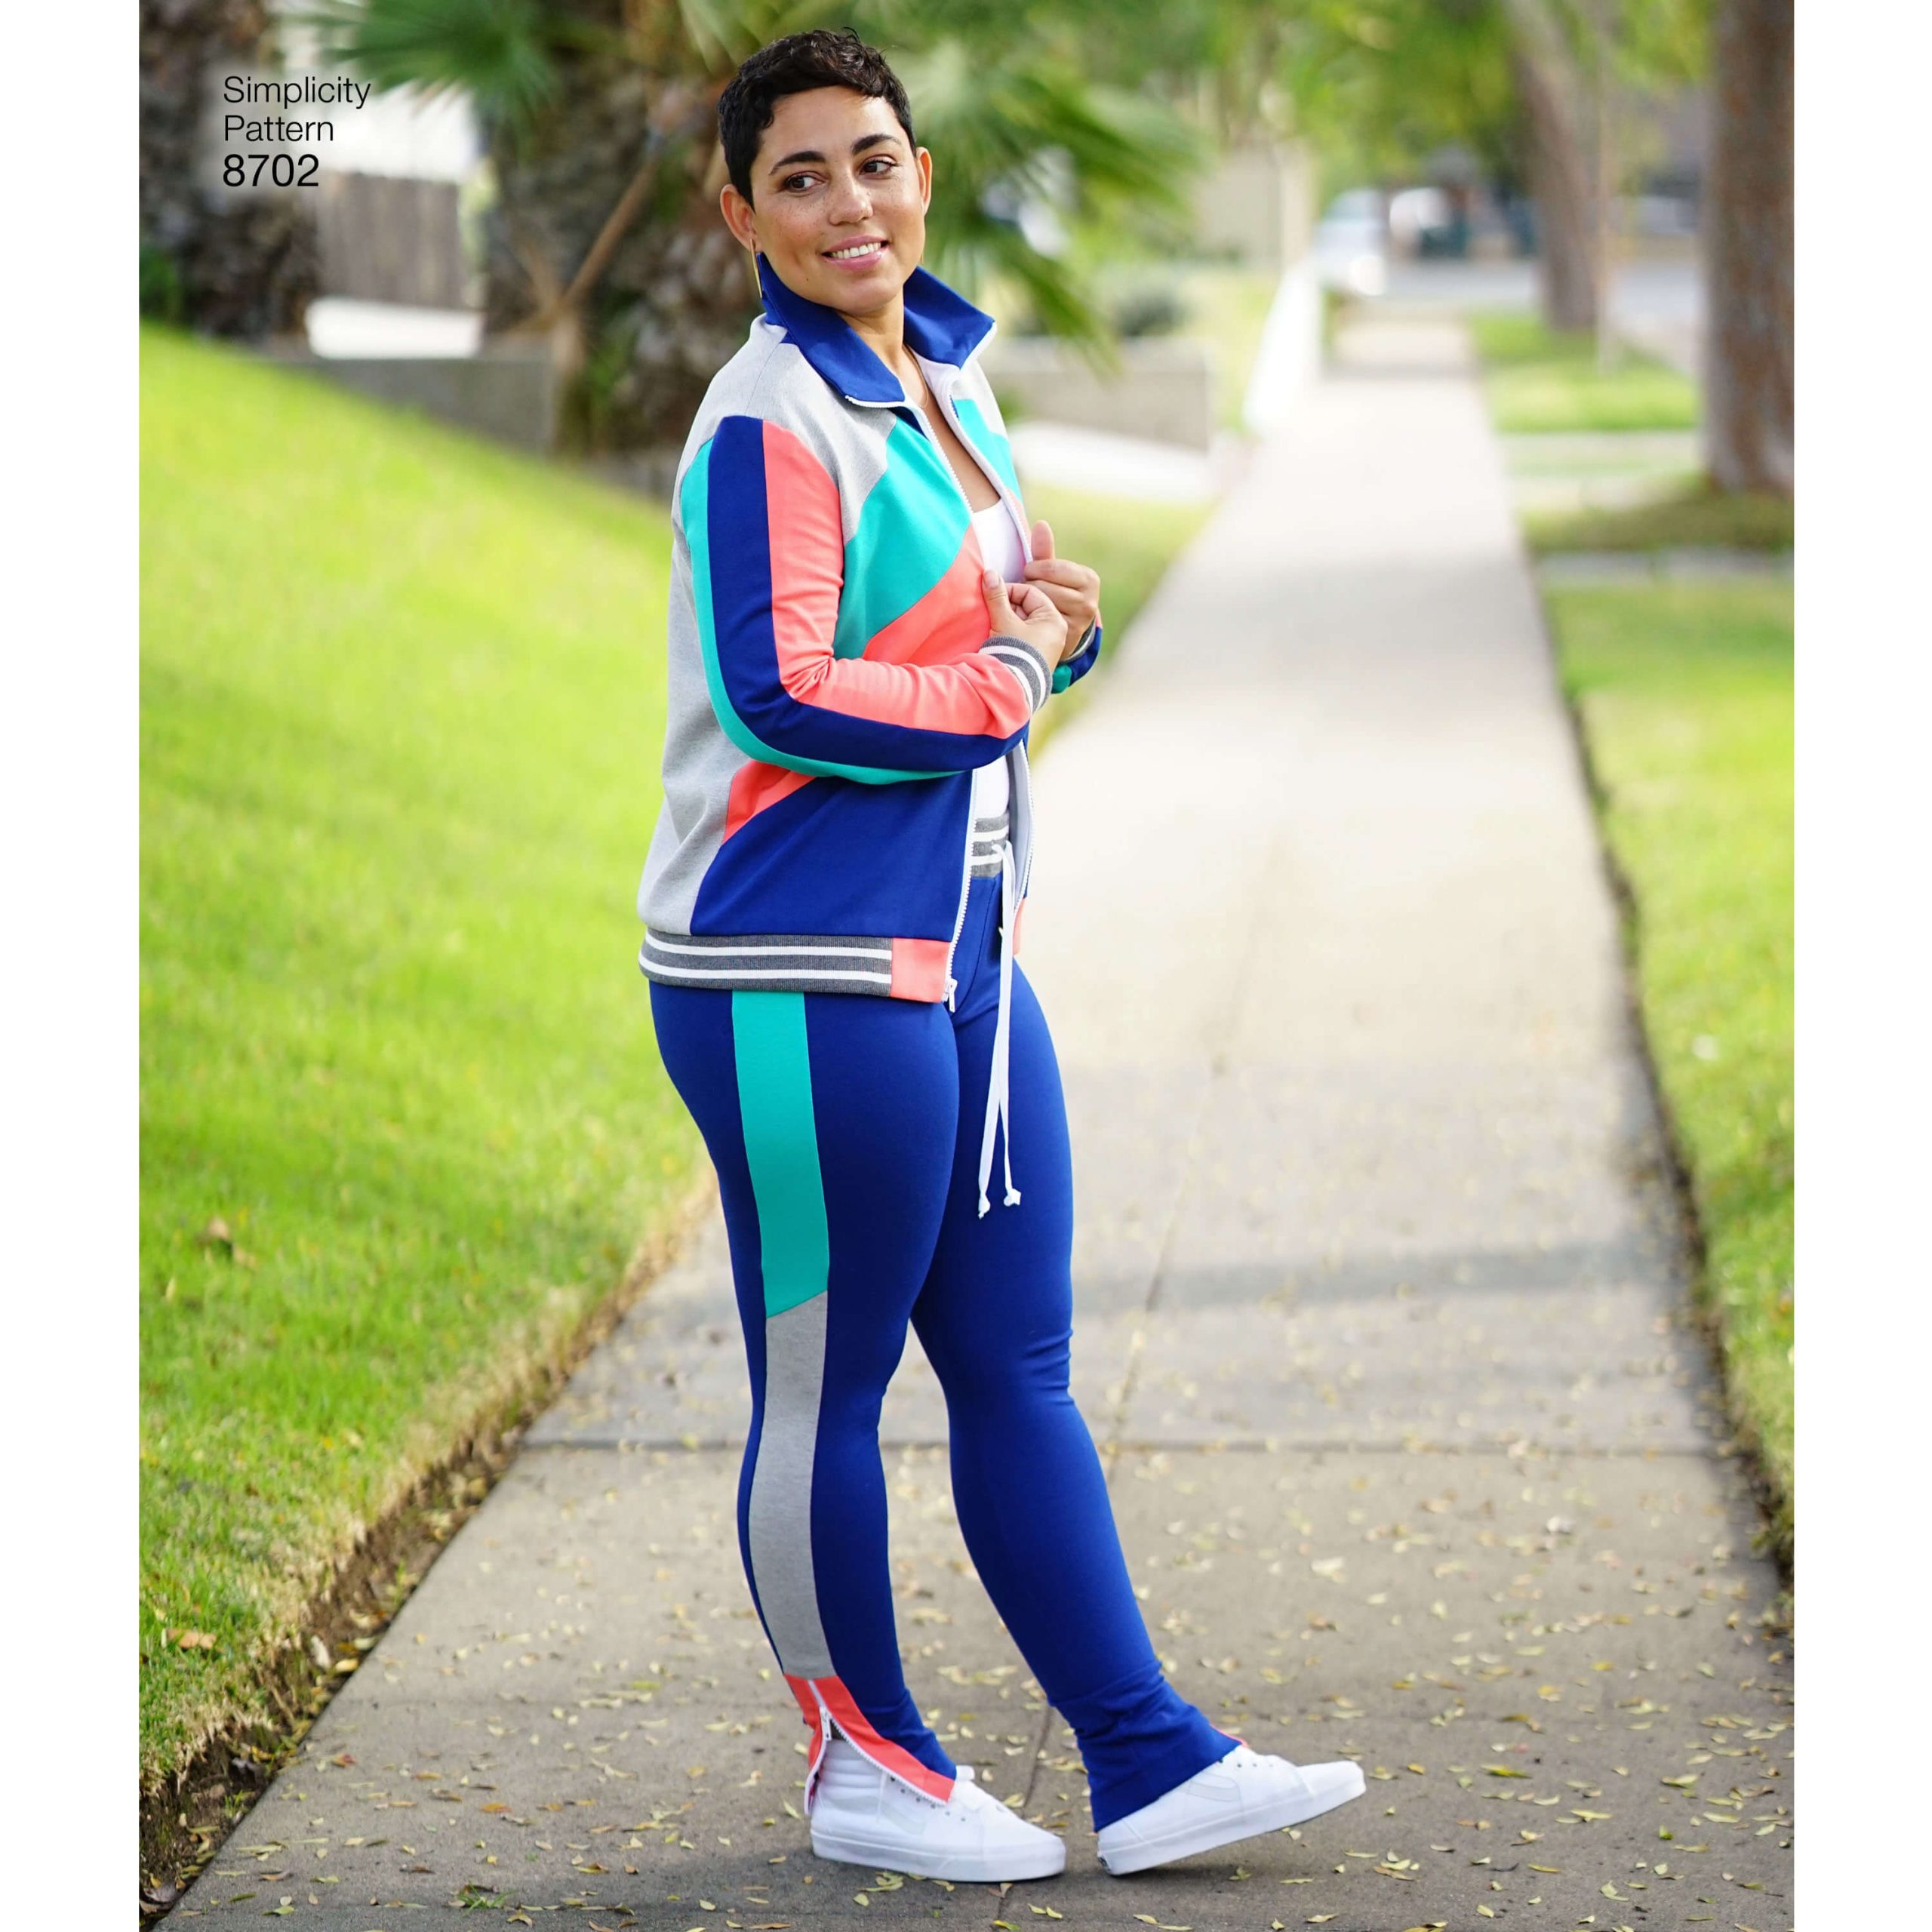 https://www.sewdirect.com/wp-content/uploads/simplicity-mimi-g-track-suit-athleisure-pattern-8702-AV4-scaled-1.jpg